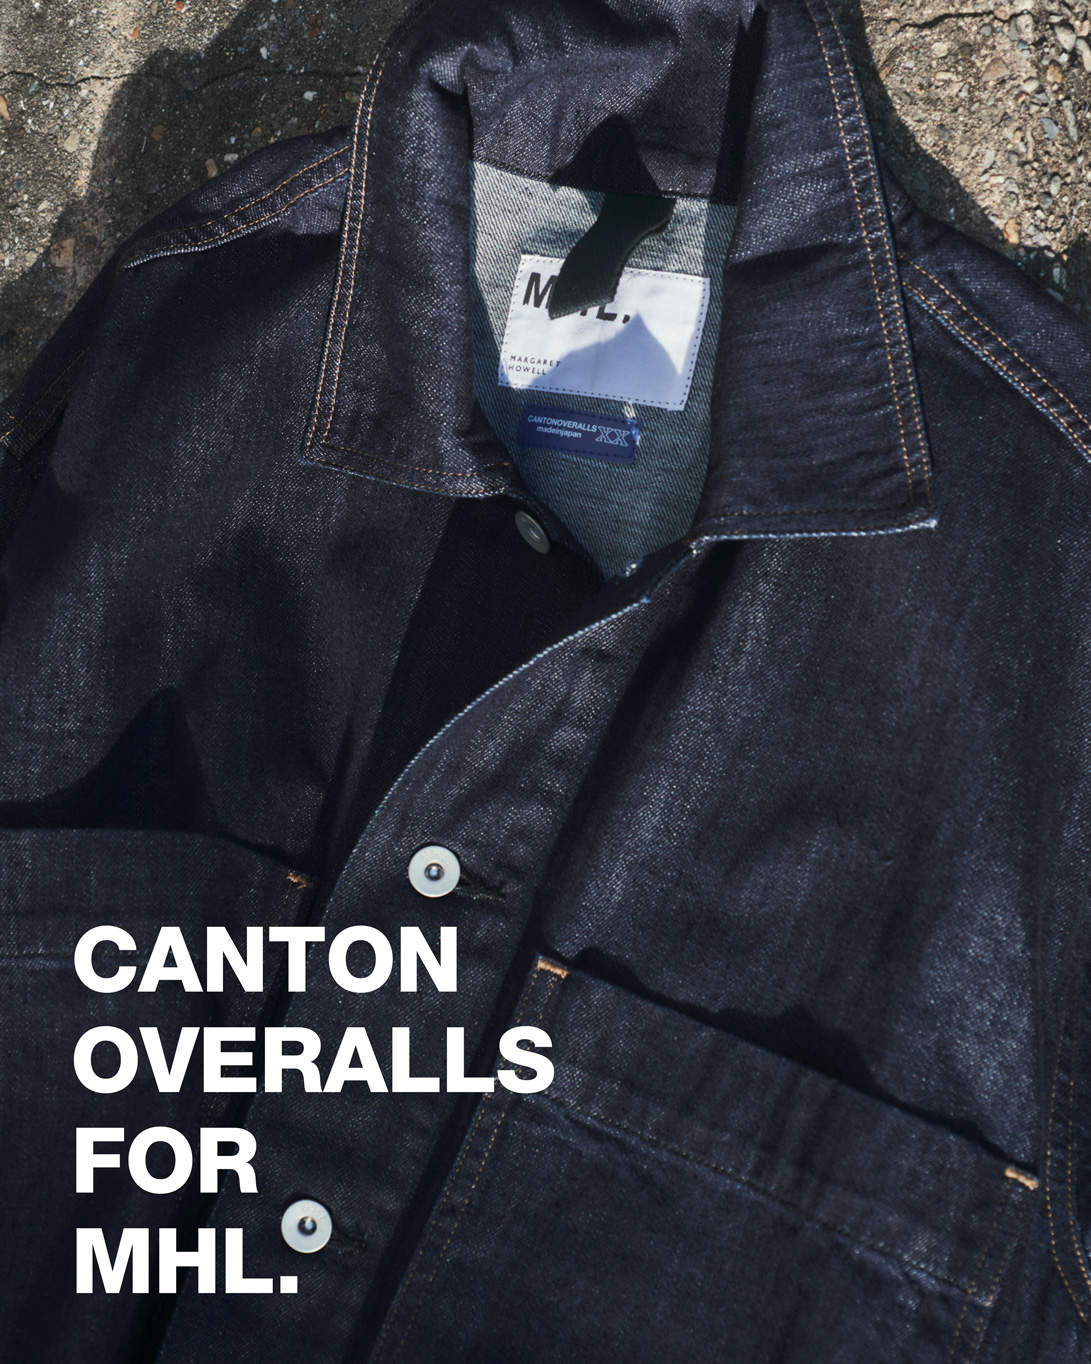 CANTON OVERALLS FOR MHL.